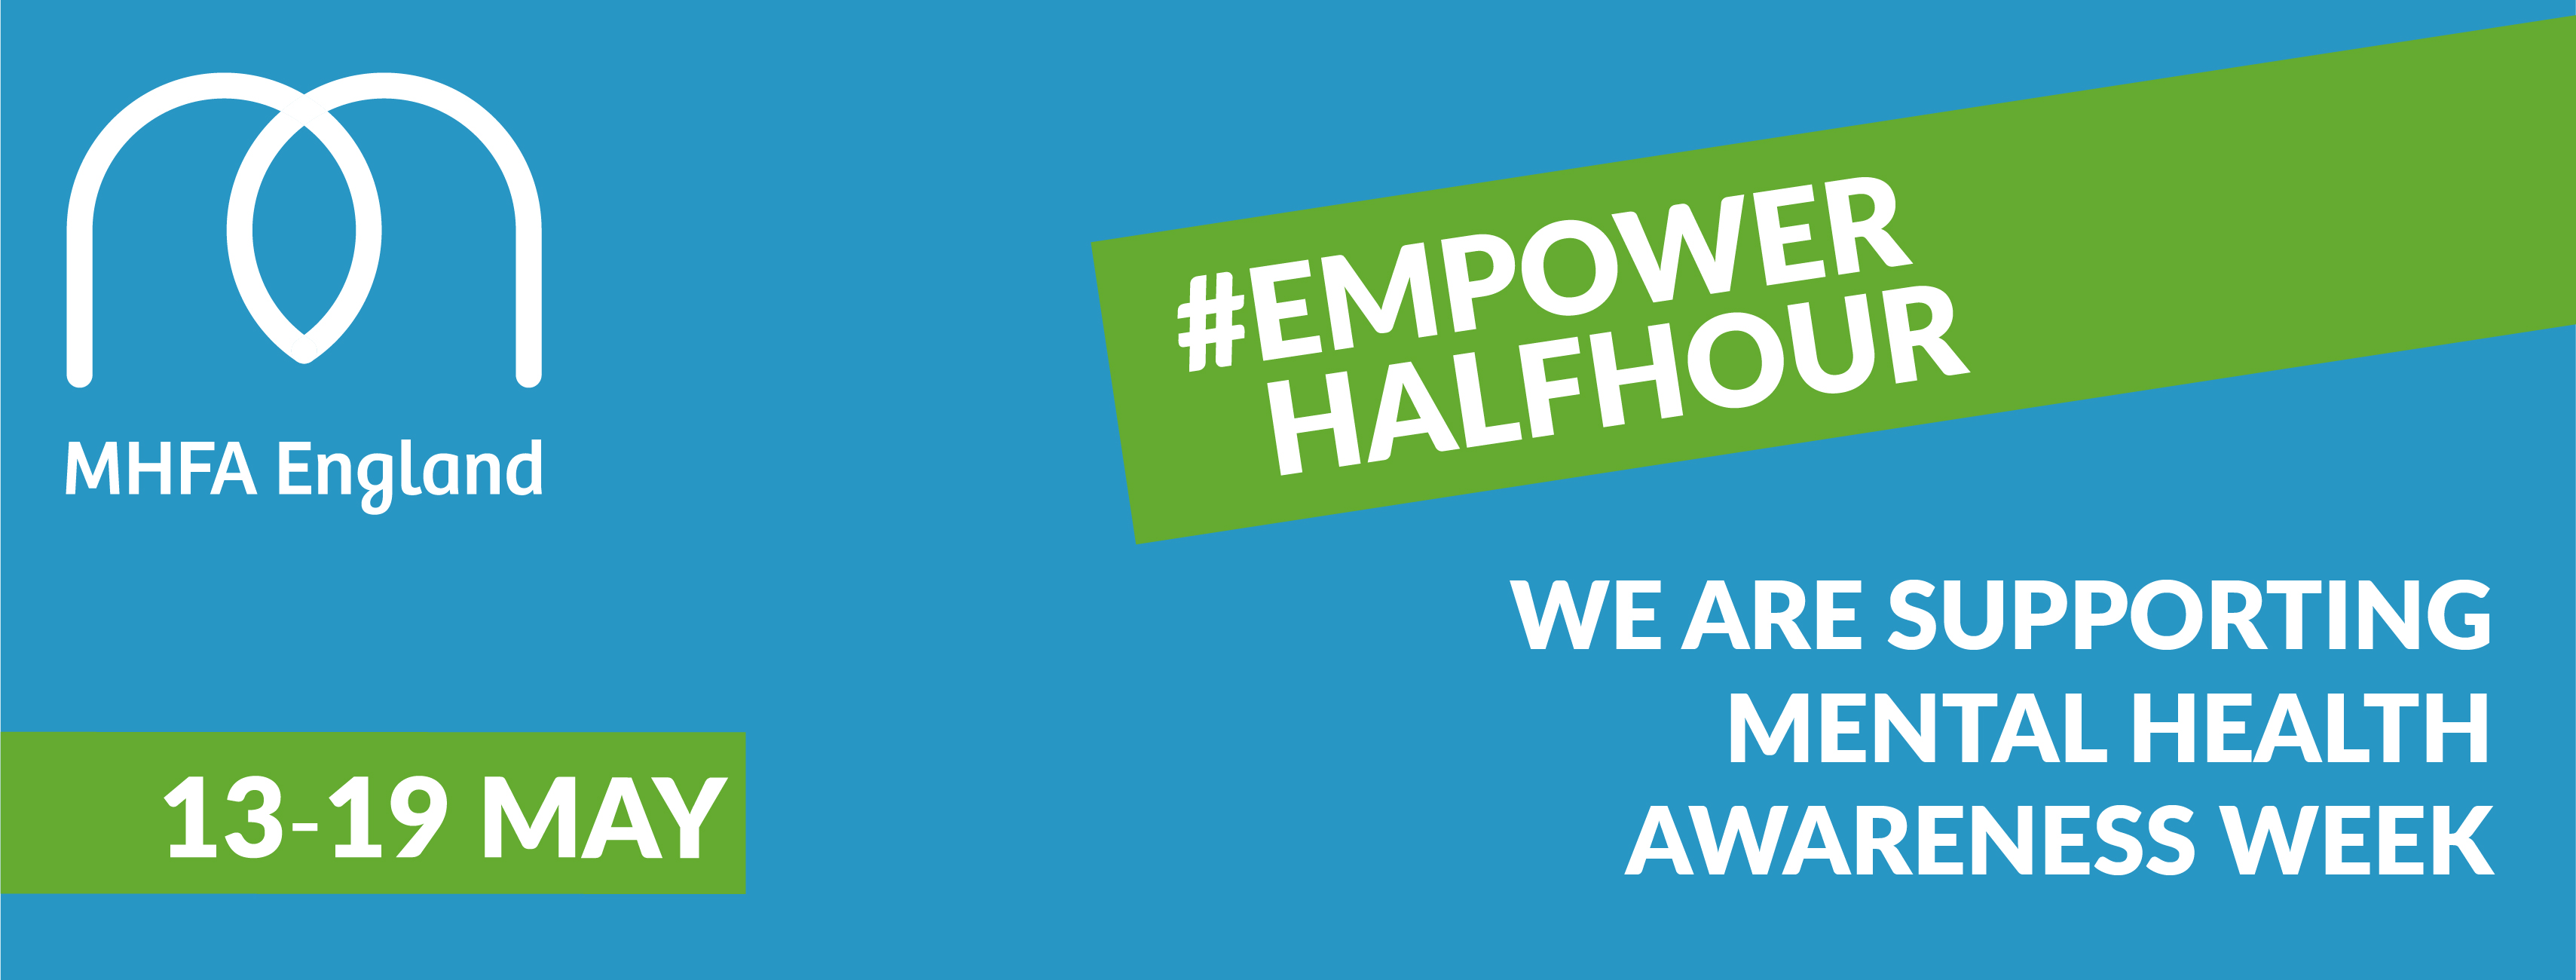 Facebook cover image: We are supporting Mental Health Awareness Week 13-19 May #EmpowerHalfHour